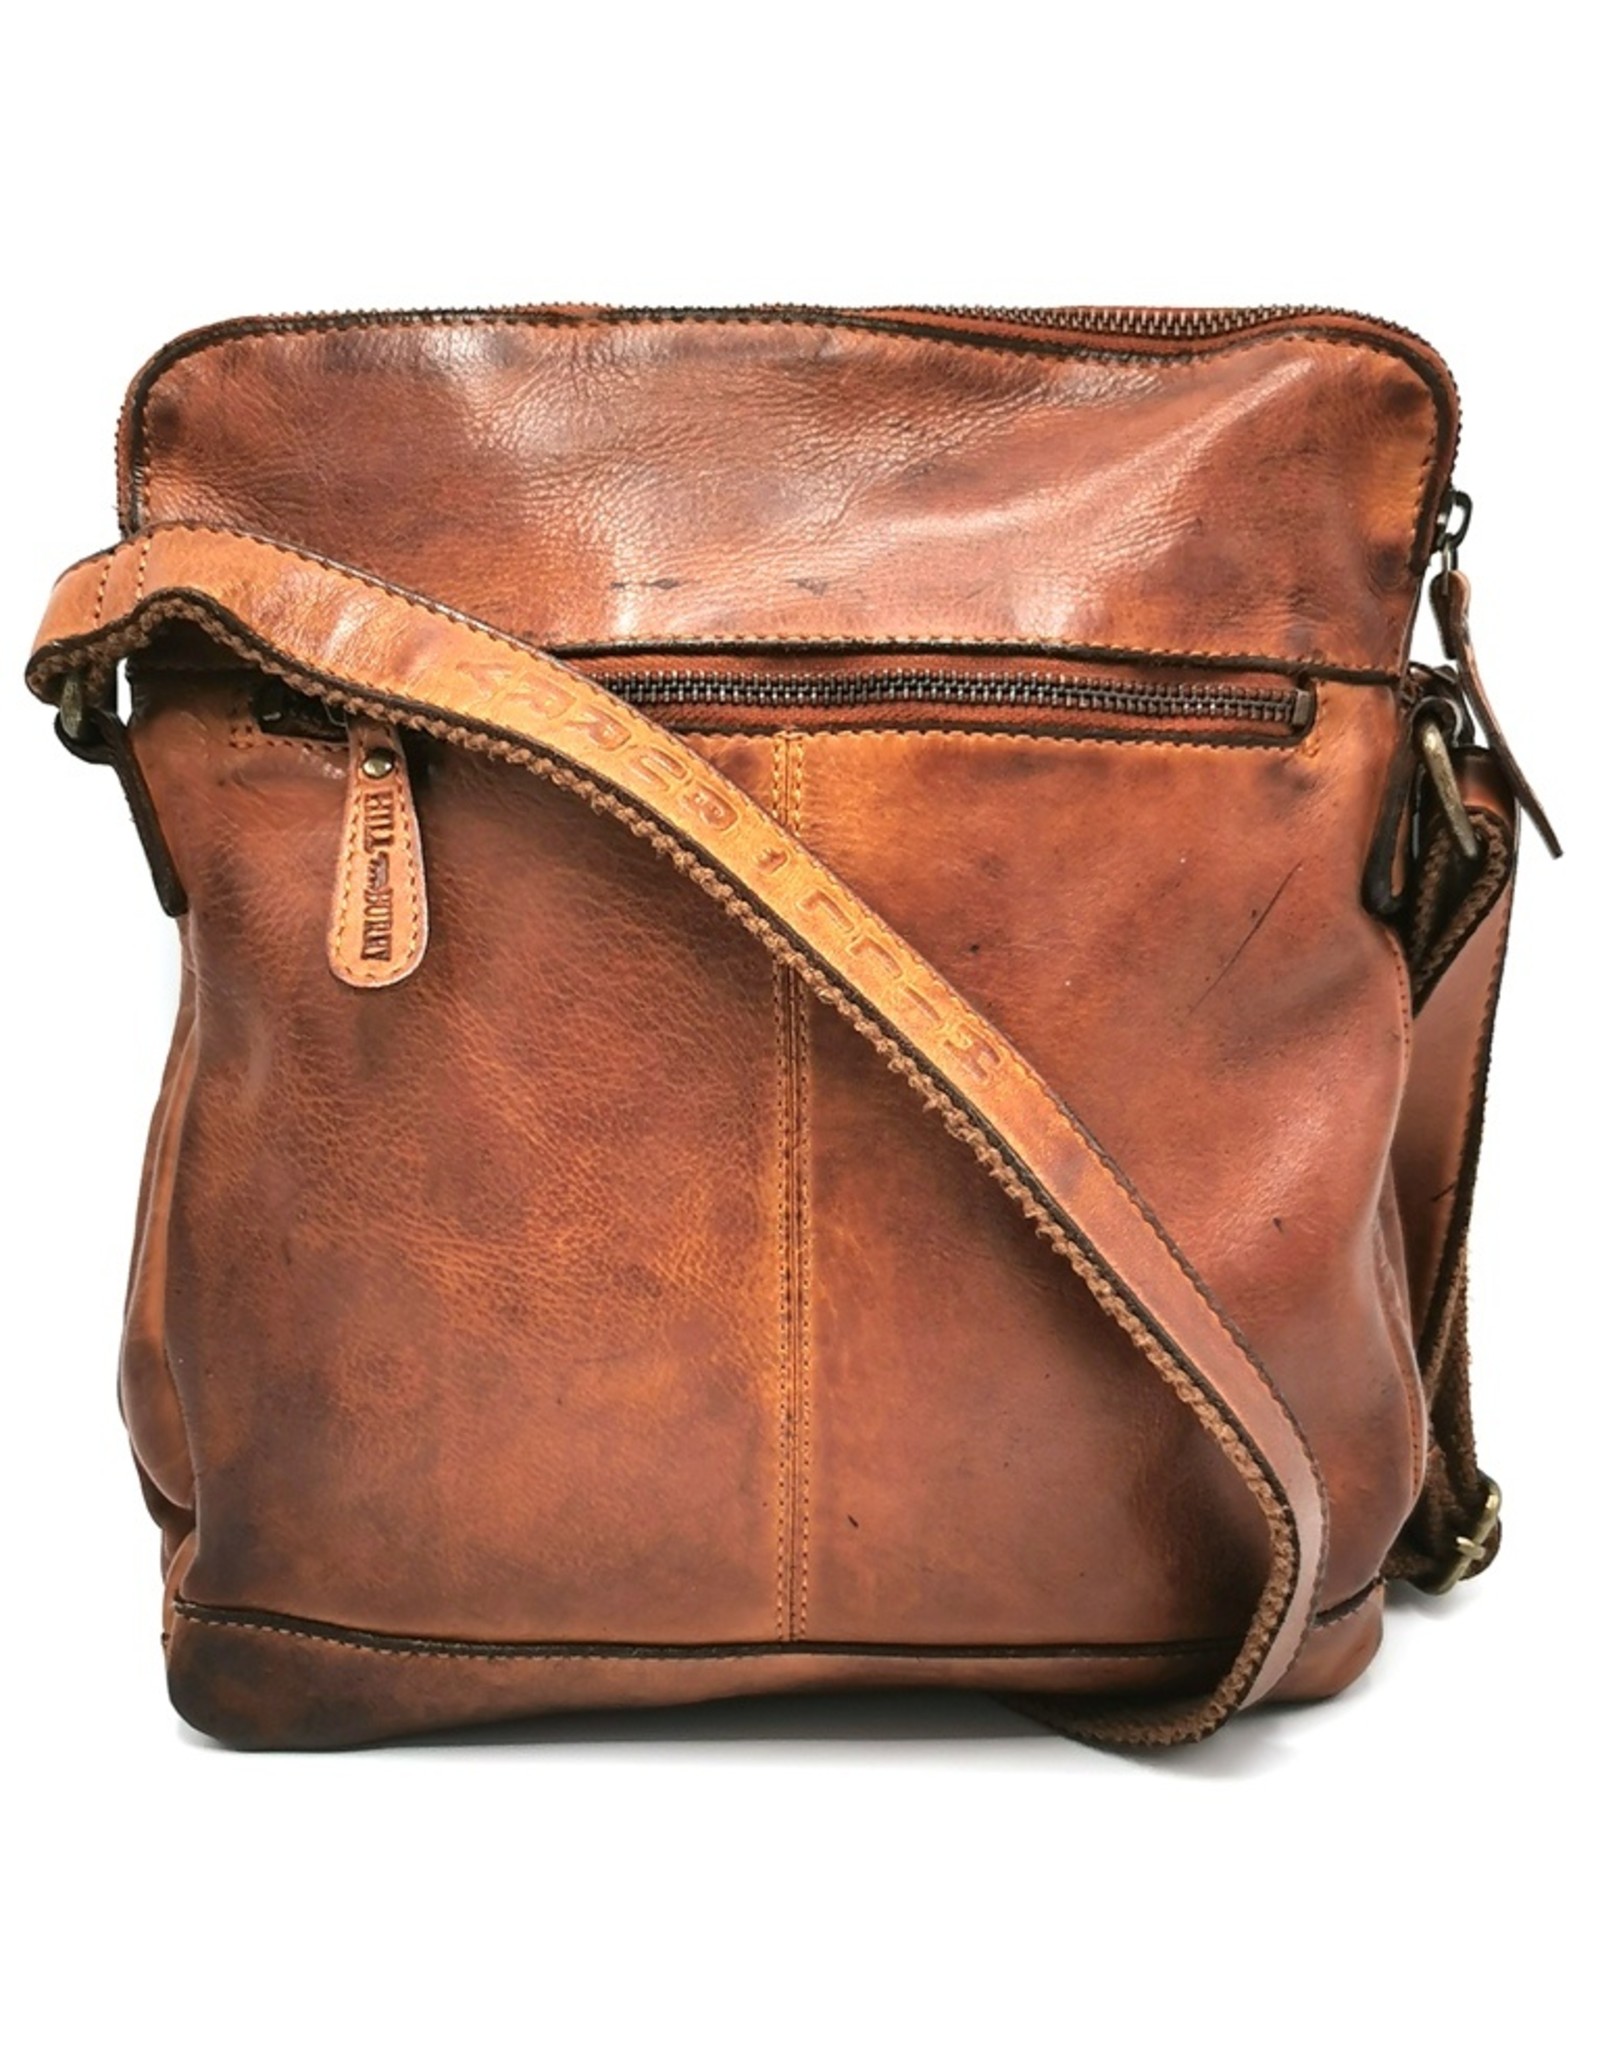 HillBurry Leather Shoulder bags  Leather crossbody bags - HillBurry Shoulder Bag Washed Leather cognac